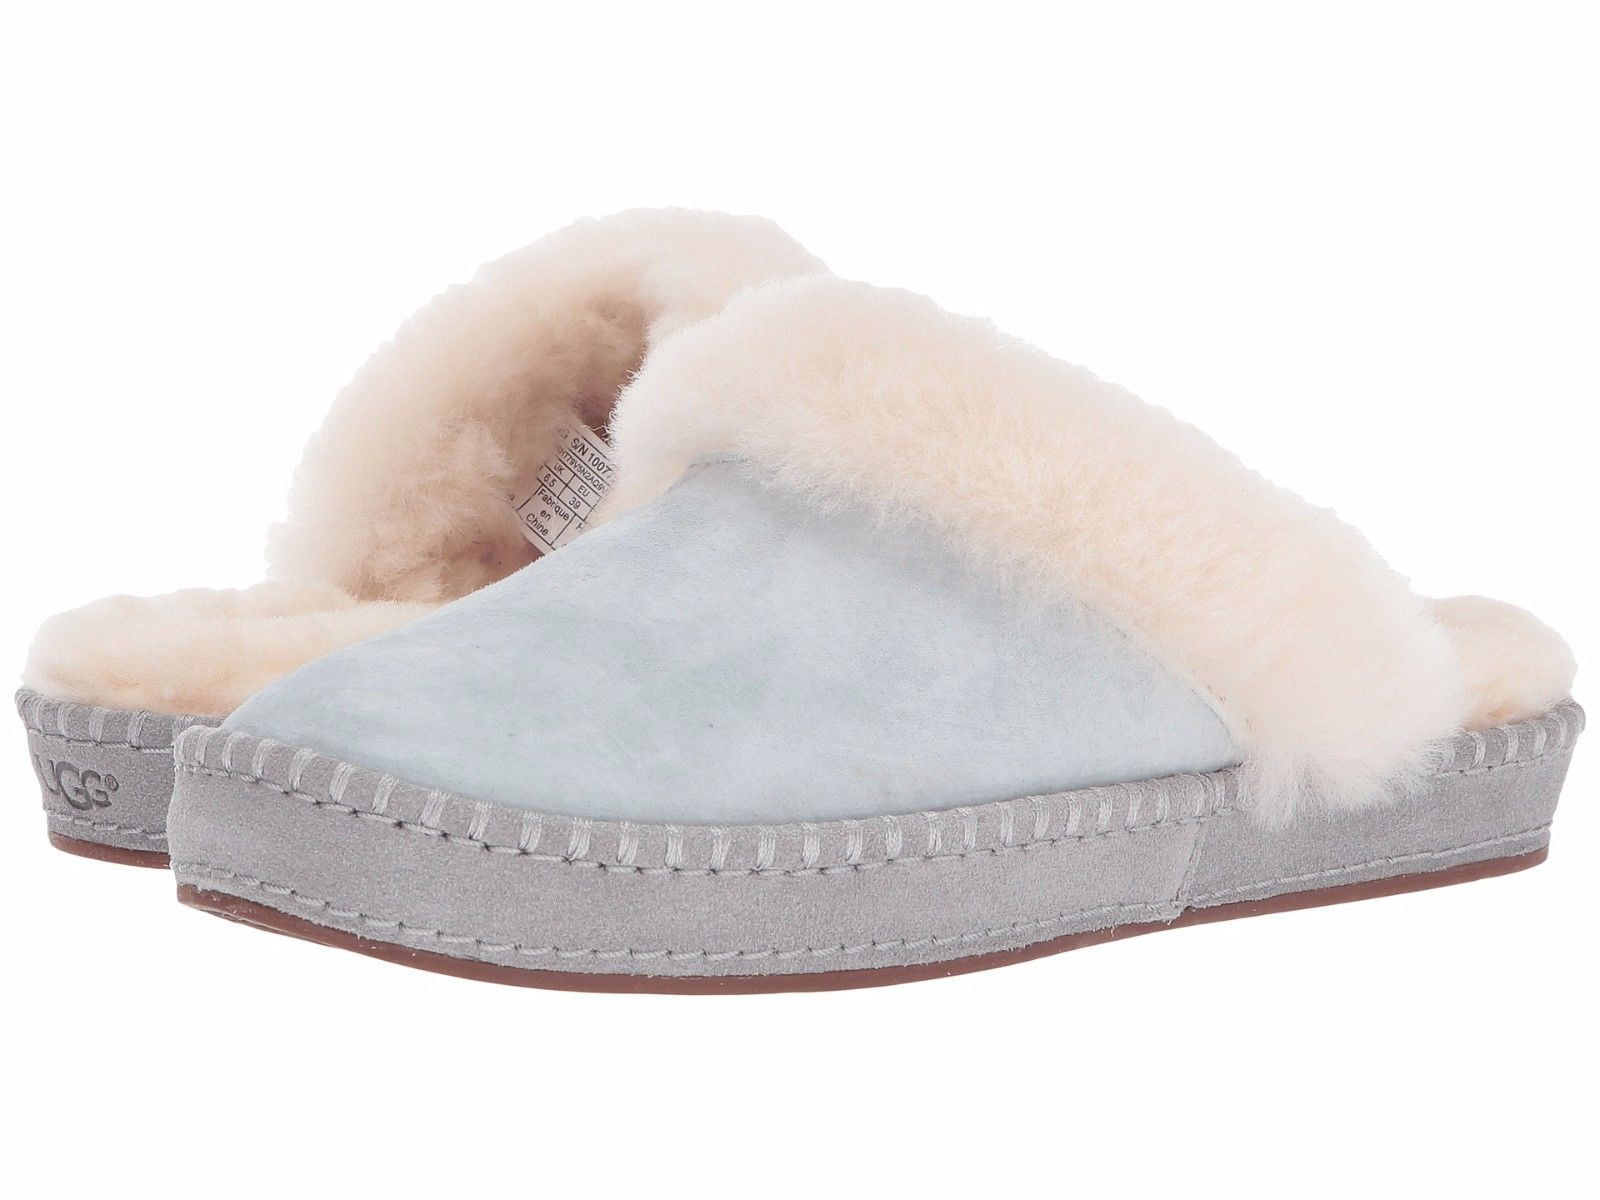 ugg aira slippers size 7